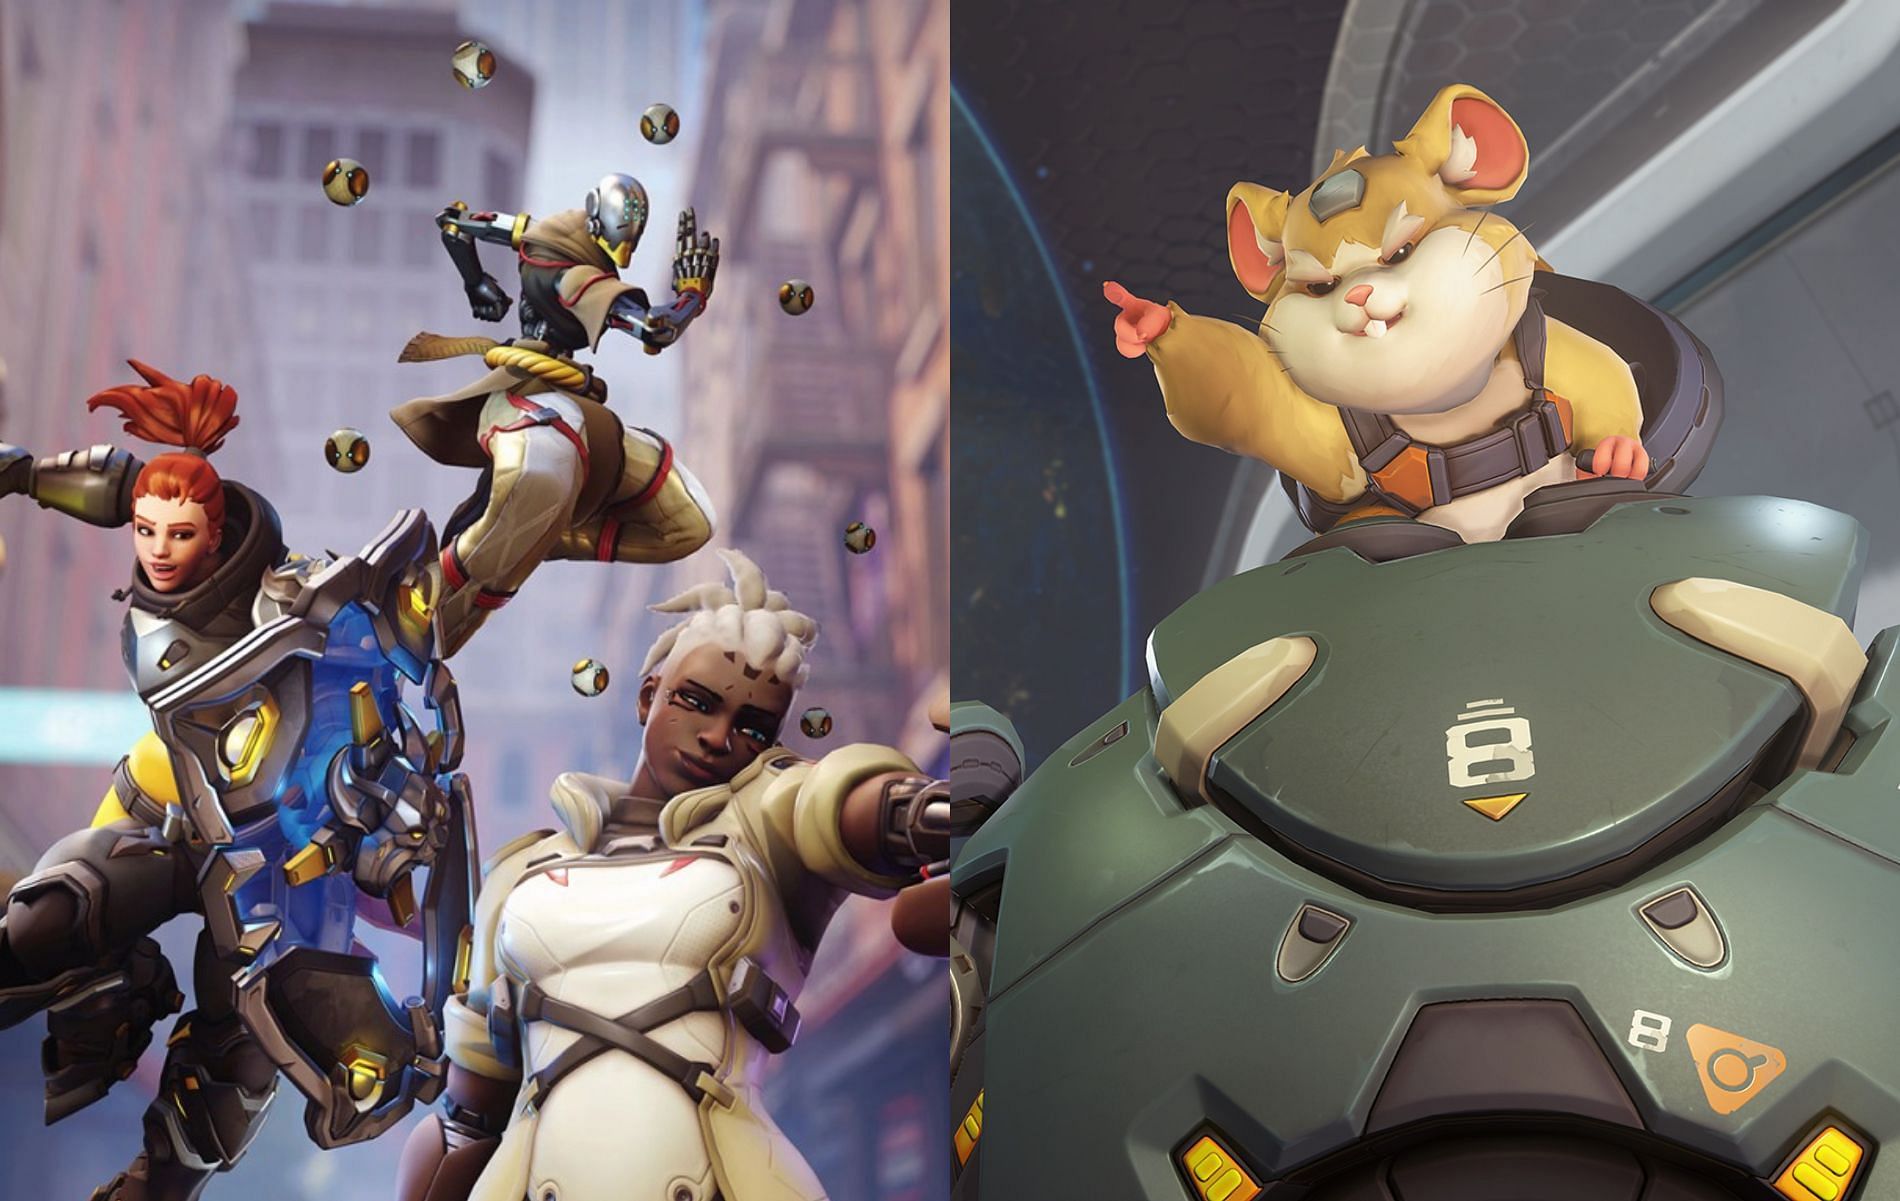 Going into 2023, these Overwatch 2 heroes could do with some improvements to make them more viable (Image svia Blizzard Entertianment)